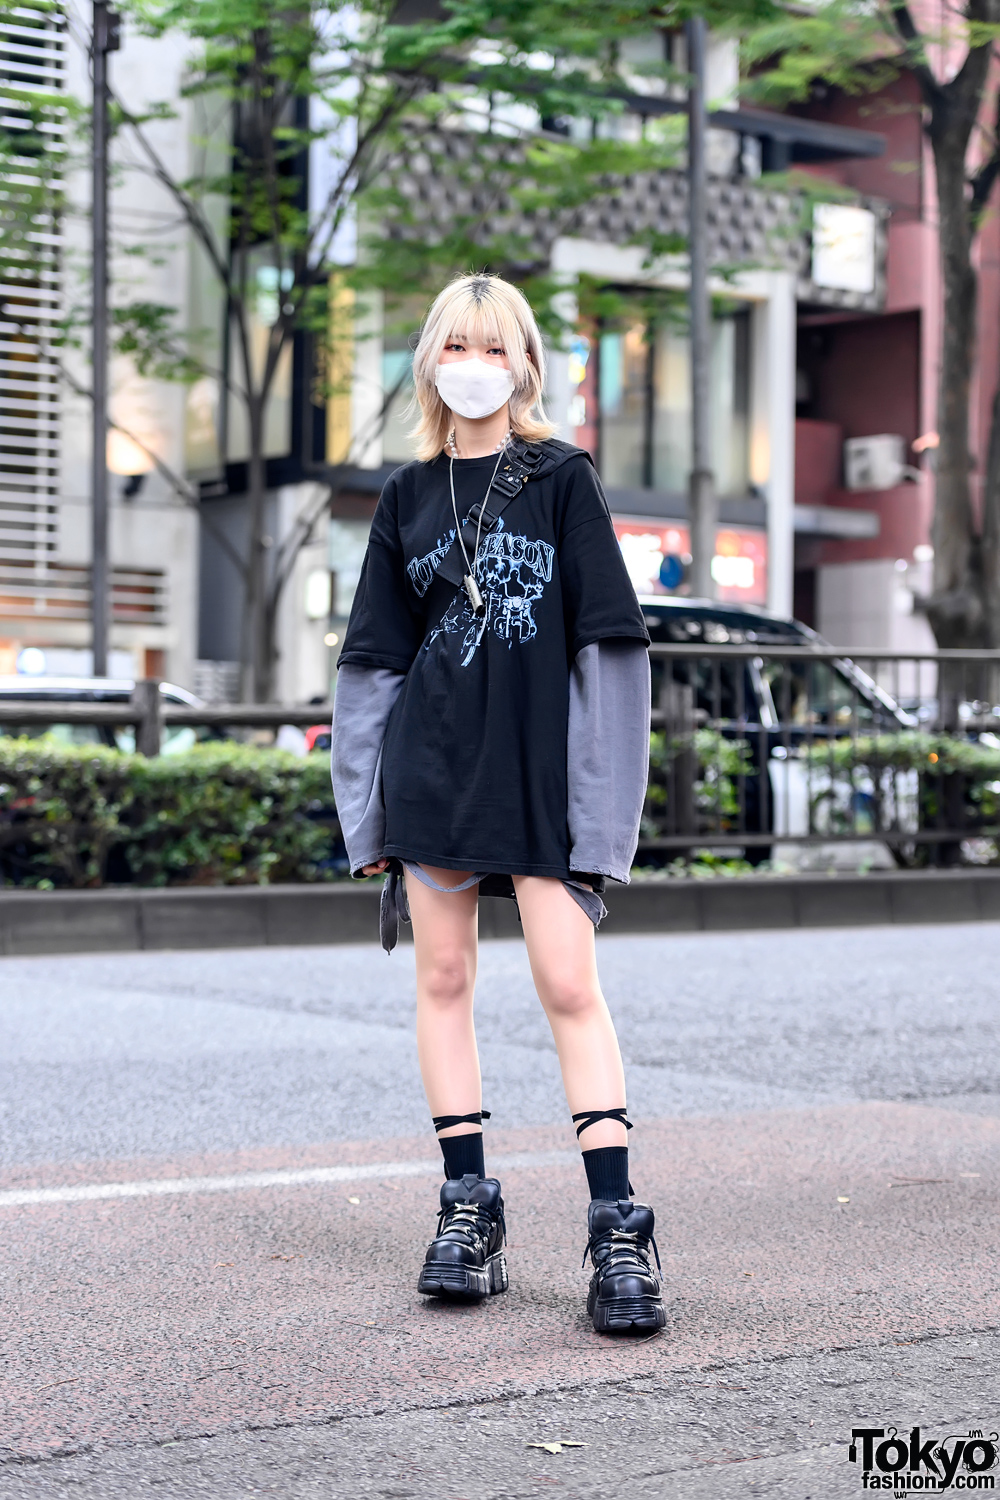 Harajuku Girl in Gray & Black Street Style w/ Never Mind The XU, Rosen Kreuz, and New Rock Boots